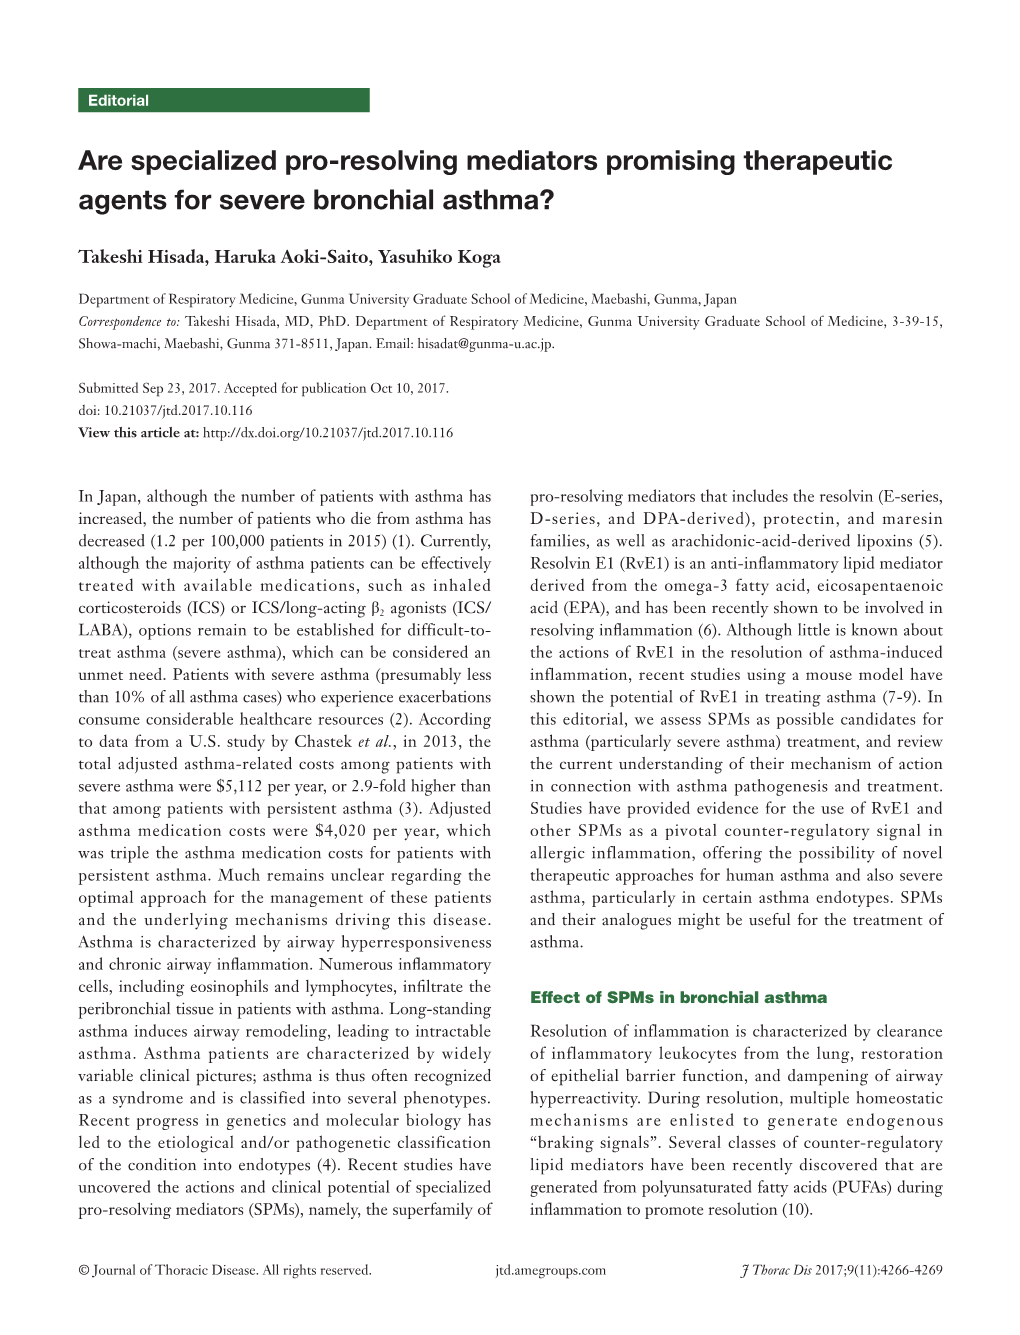 Are Specialized Pro-Resolving Mediators Promising Therapeutic Agents for Severe Bronchial Asthma?